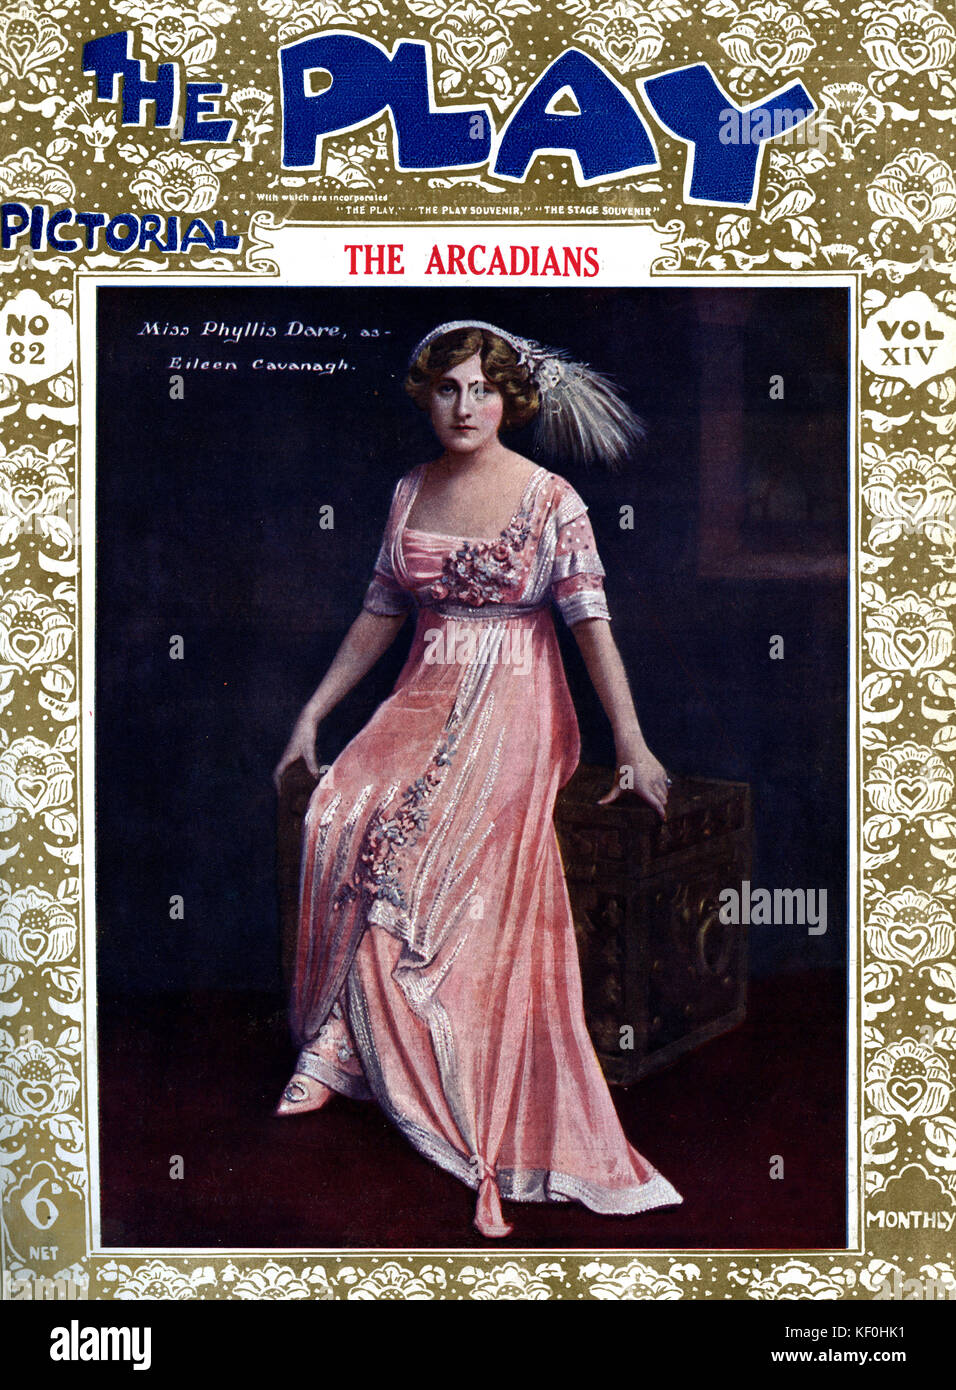 'The Arcadians' by Mark Ambient, Alexander Thompson, Lionel Monckton and Howard Talbot, with Phyllis Dare as Eileen Cavanagh (15 August 1890 – 27 April 1975). A London production at the Shaftesbury Theatre, 29 April 1909. Cover of Play Pictorial, 1909. Stock Photo